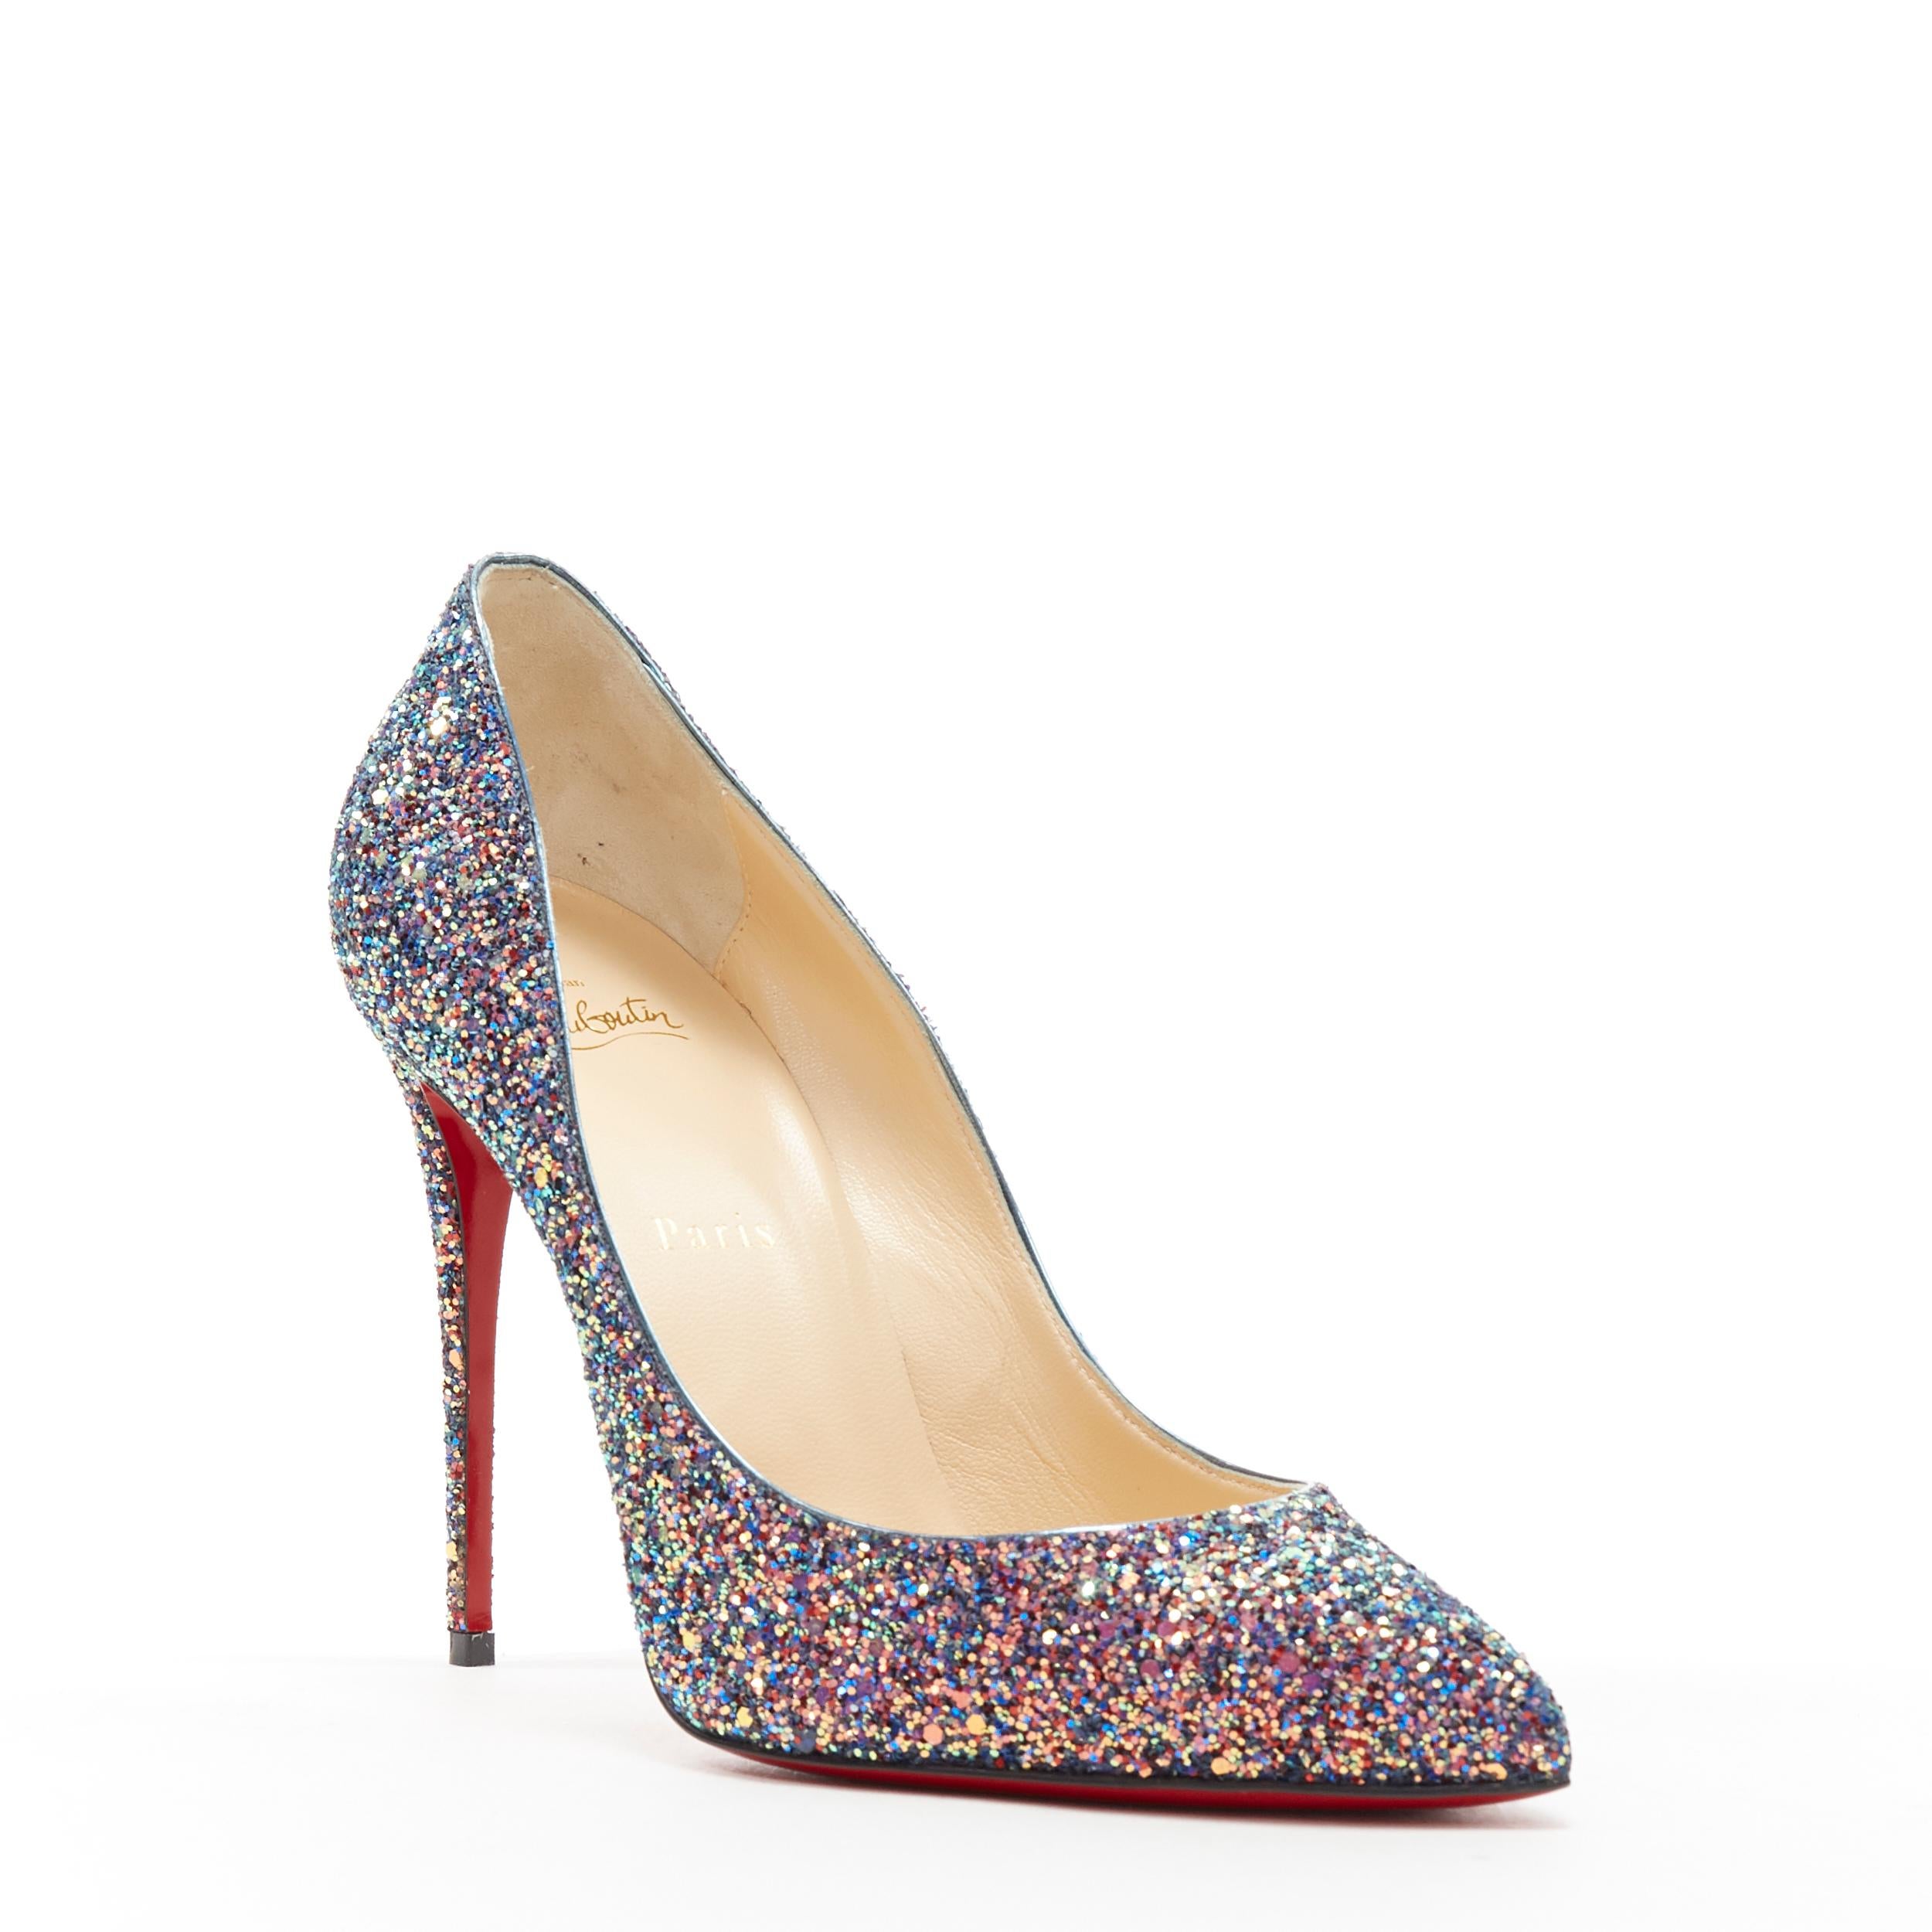 new CHRISTIAN LOUBOUTIN Pigalle Follies 100 iridescent navy glitter pump EU40
Brand: Christian Louboutin
Designer: Christian Louboutin
Model Name / Style: Pigalles Follies 100
Material: Leather
Color: Blue
Pattern: Solid
Extra Detail: Style code: